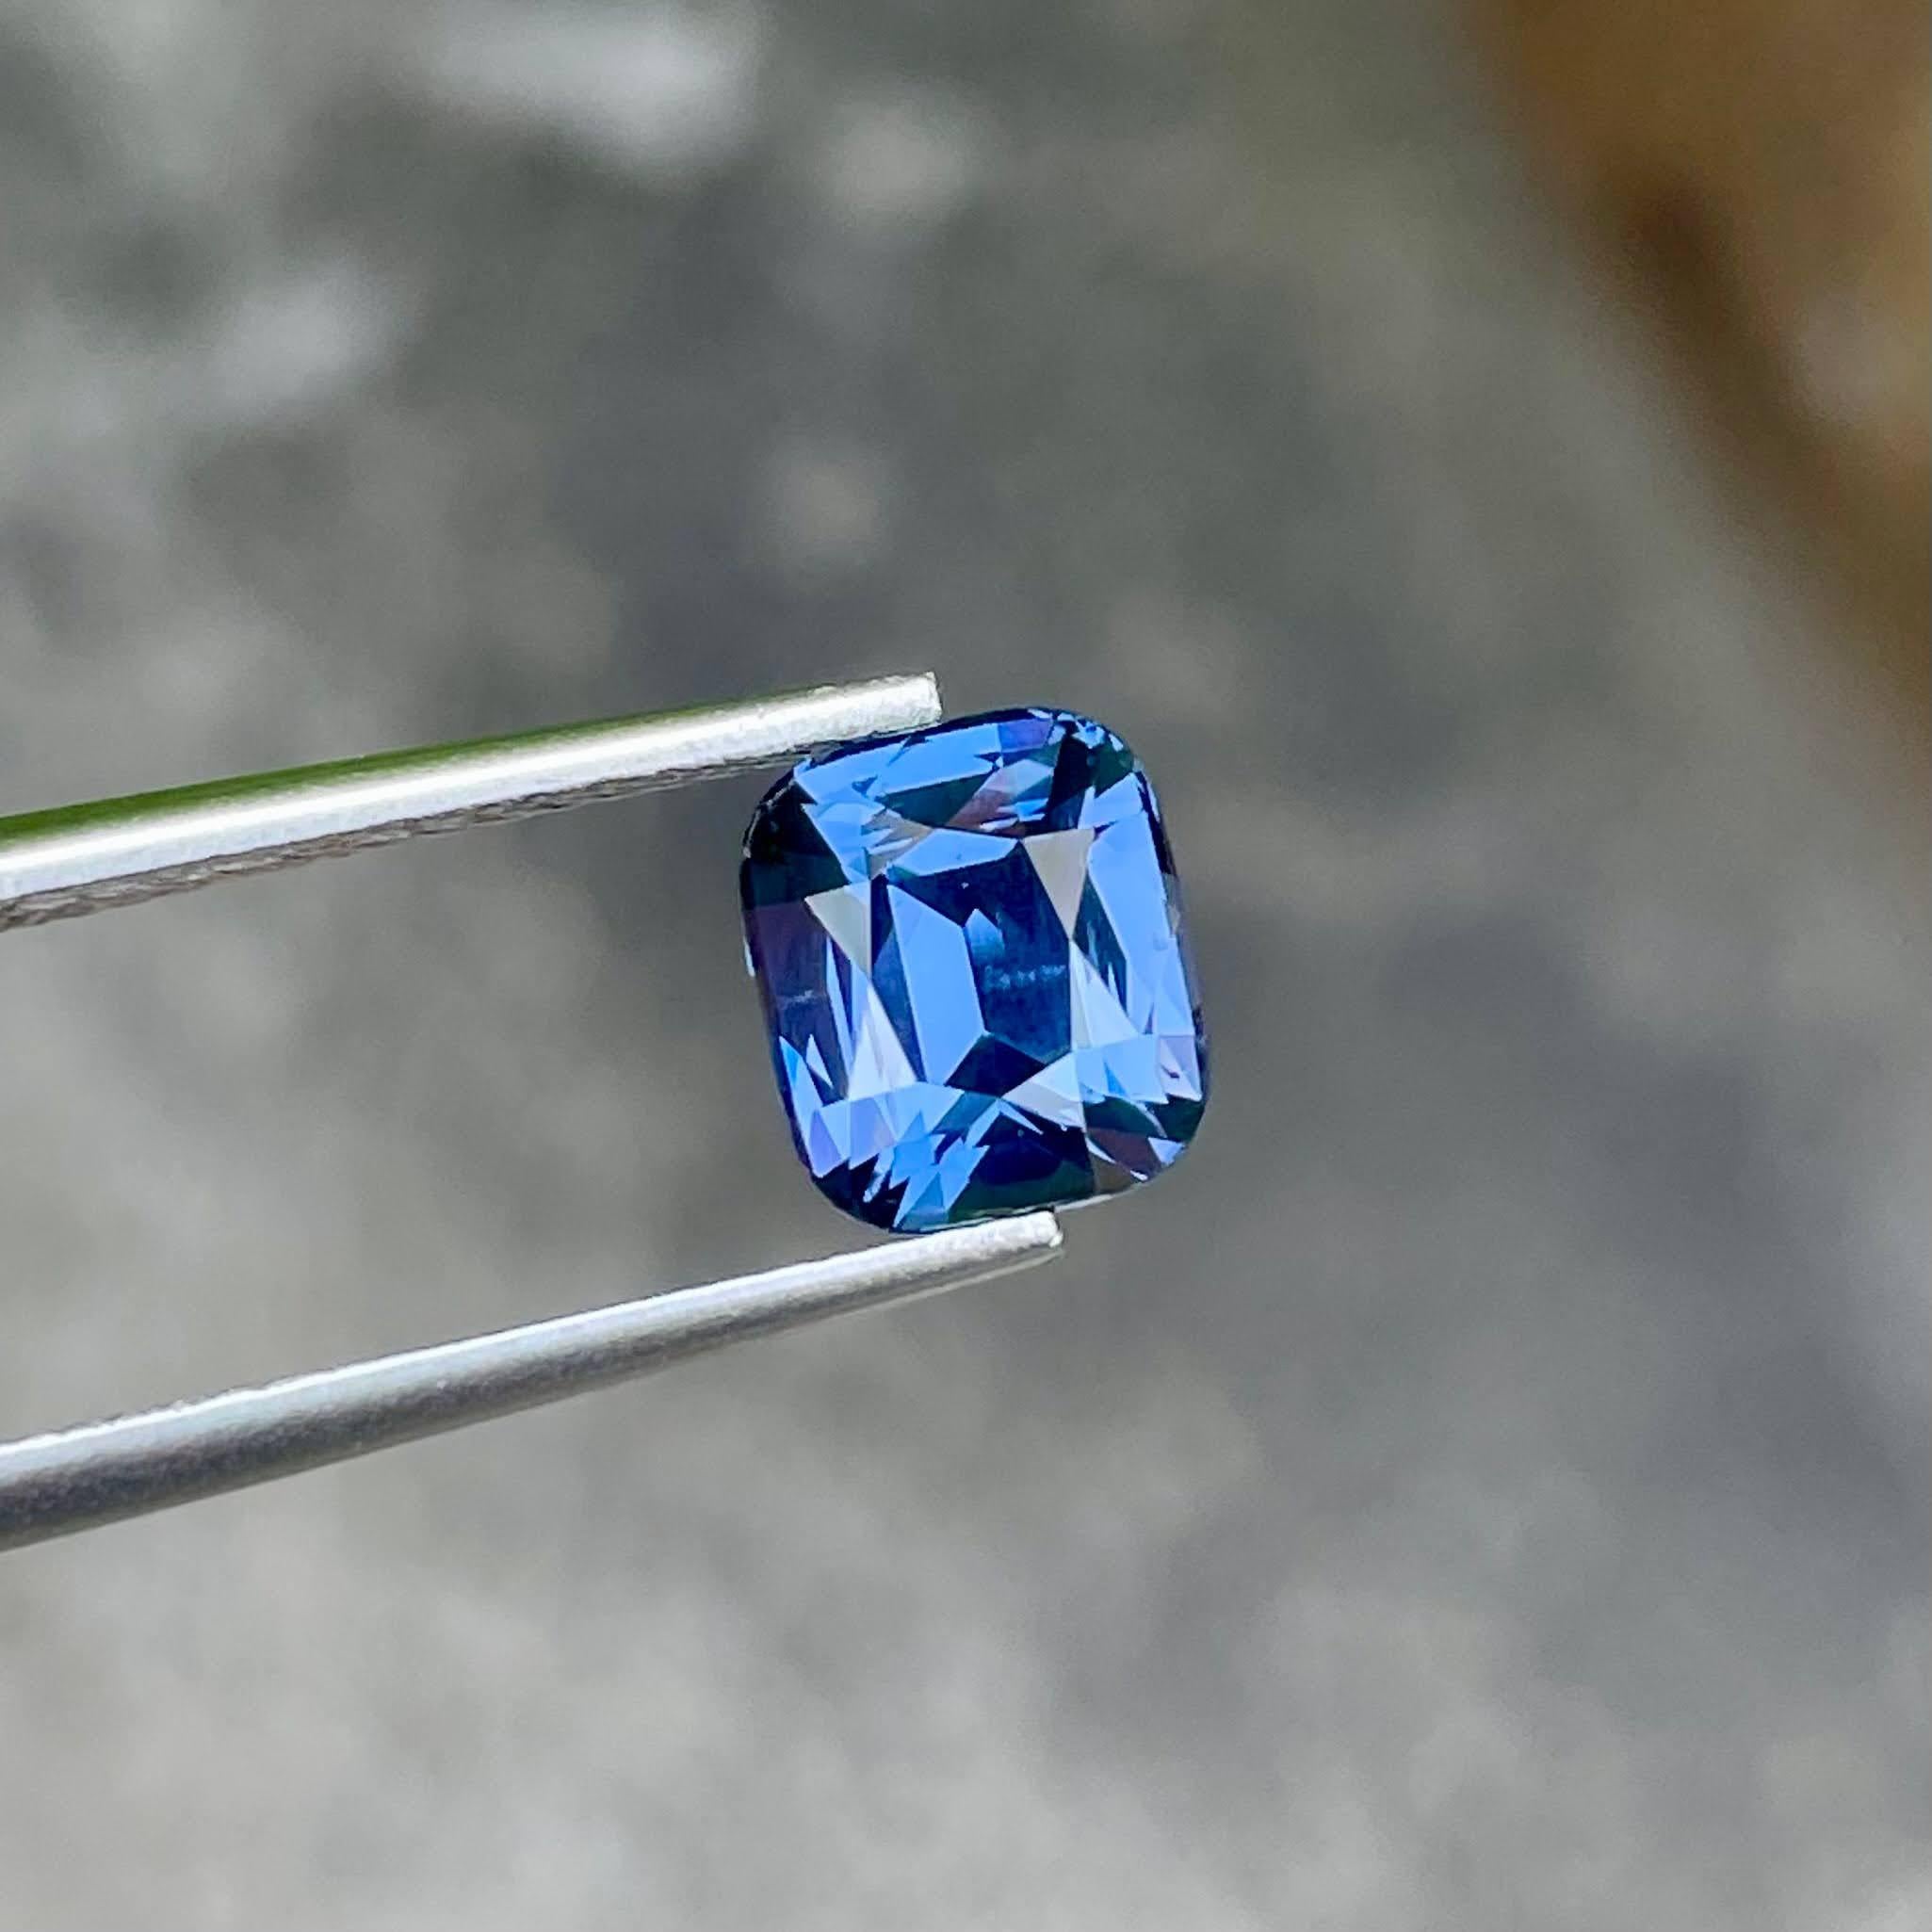 Weight 2.61 carats 
Dimensions 7.97x6.94x5.23 mm 
Treatment none 
Origin Tanzania 
Clarity eye clean 
Shape cushion 
Cut fancy cushion 




The 2.61 carats Color Change Violetish Blue Spinel Stone showcases the exquisite beauty of Tanzanian